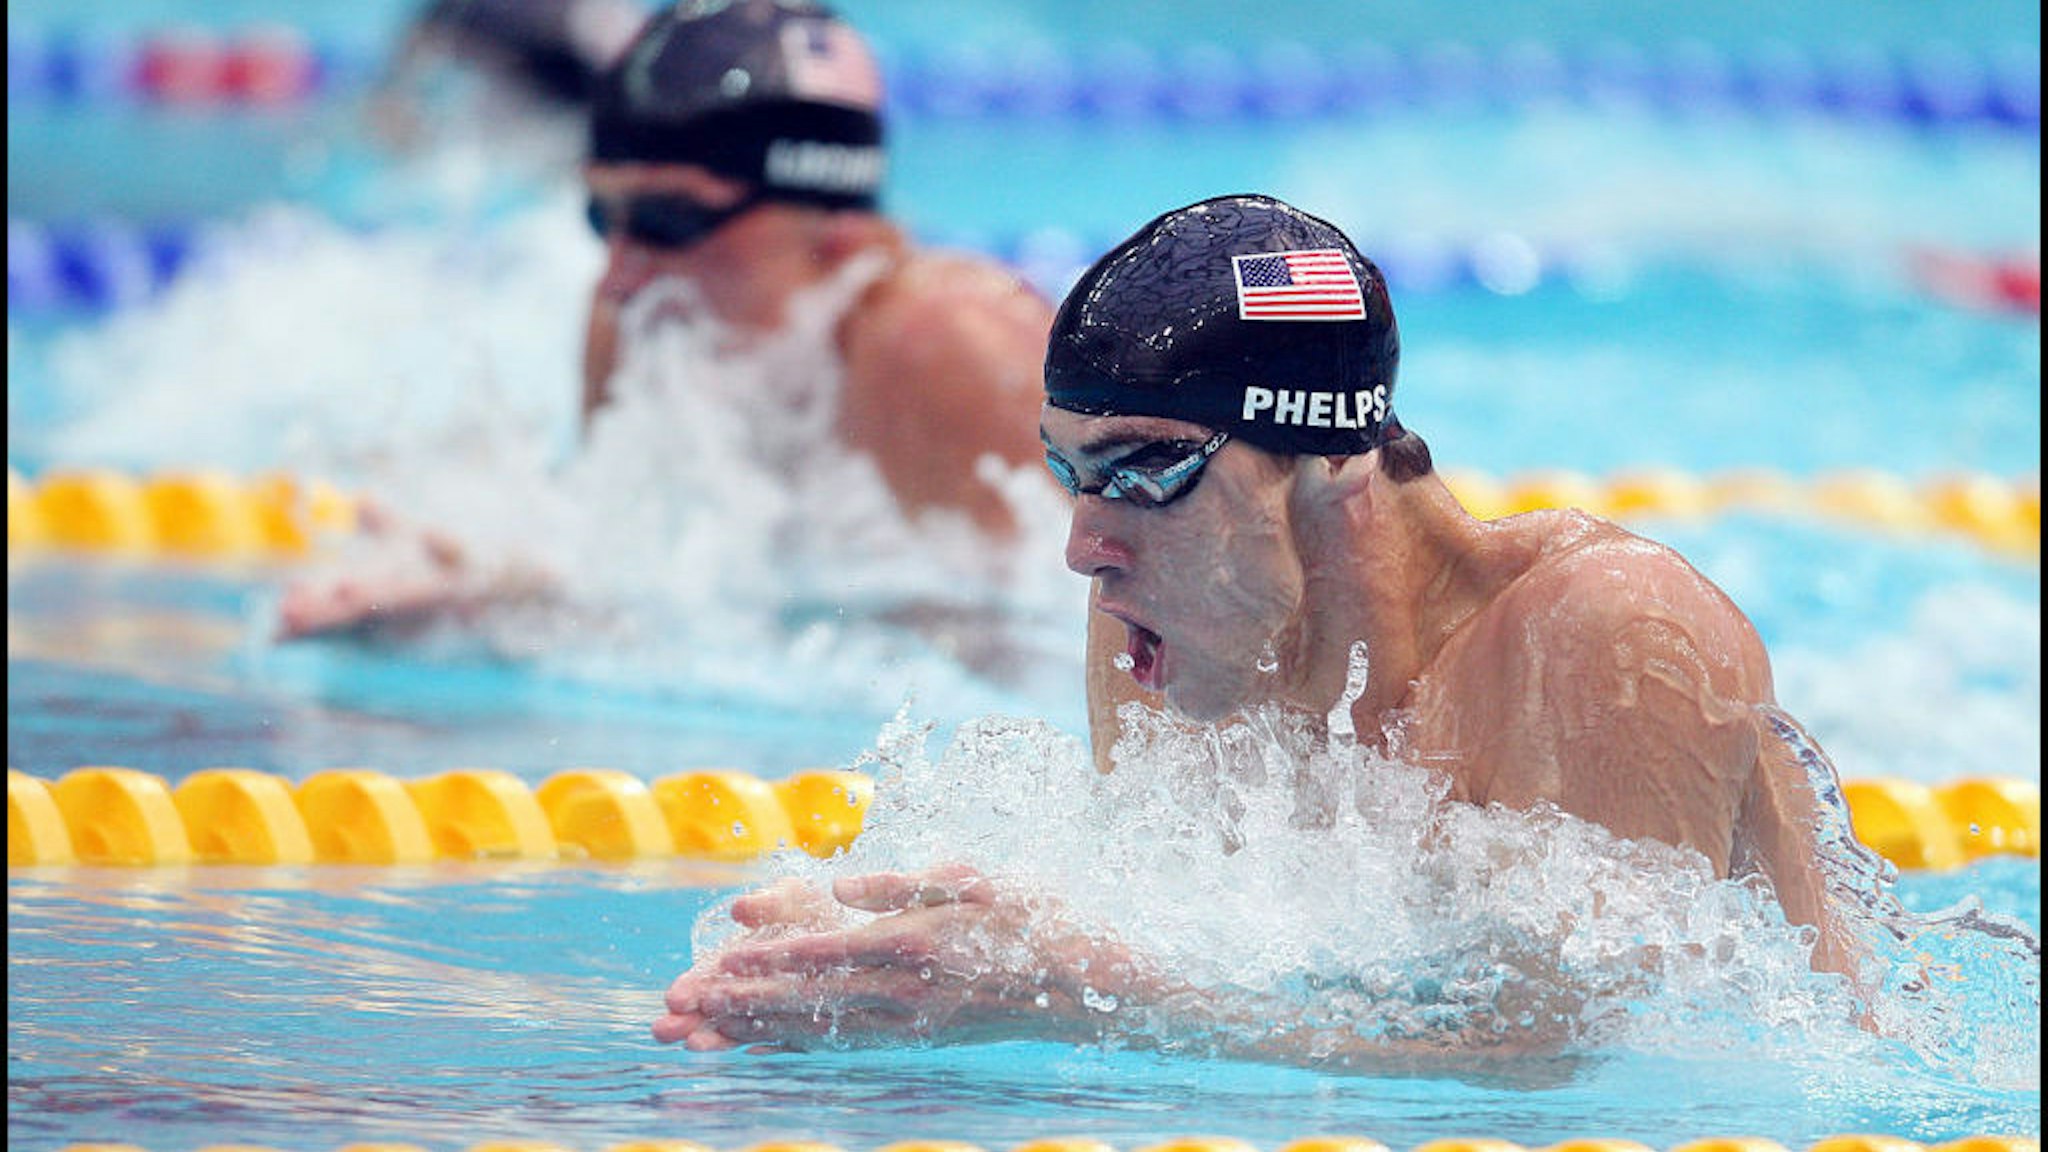 Michael Phelps of the United States competes in the Men's 200m Individual Medley Final at the National Aquatics Center on Day 7 of the Beijing 2008 Olympic Games on August 15, 2008 in Beijing, China. (Photo by Ian MacNicol/Getty Images)